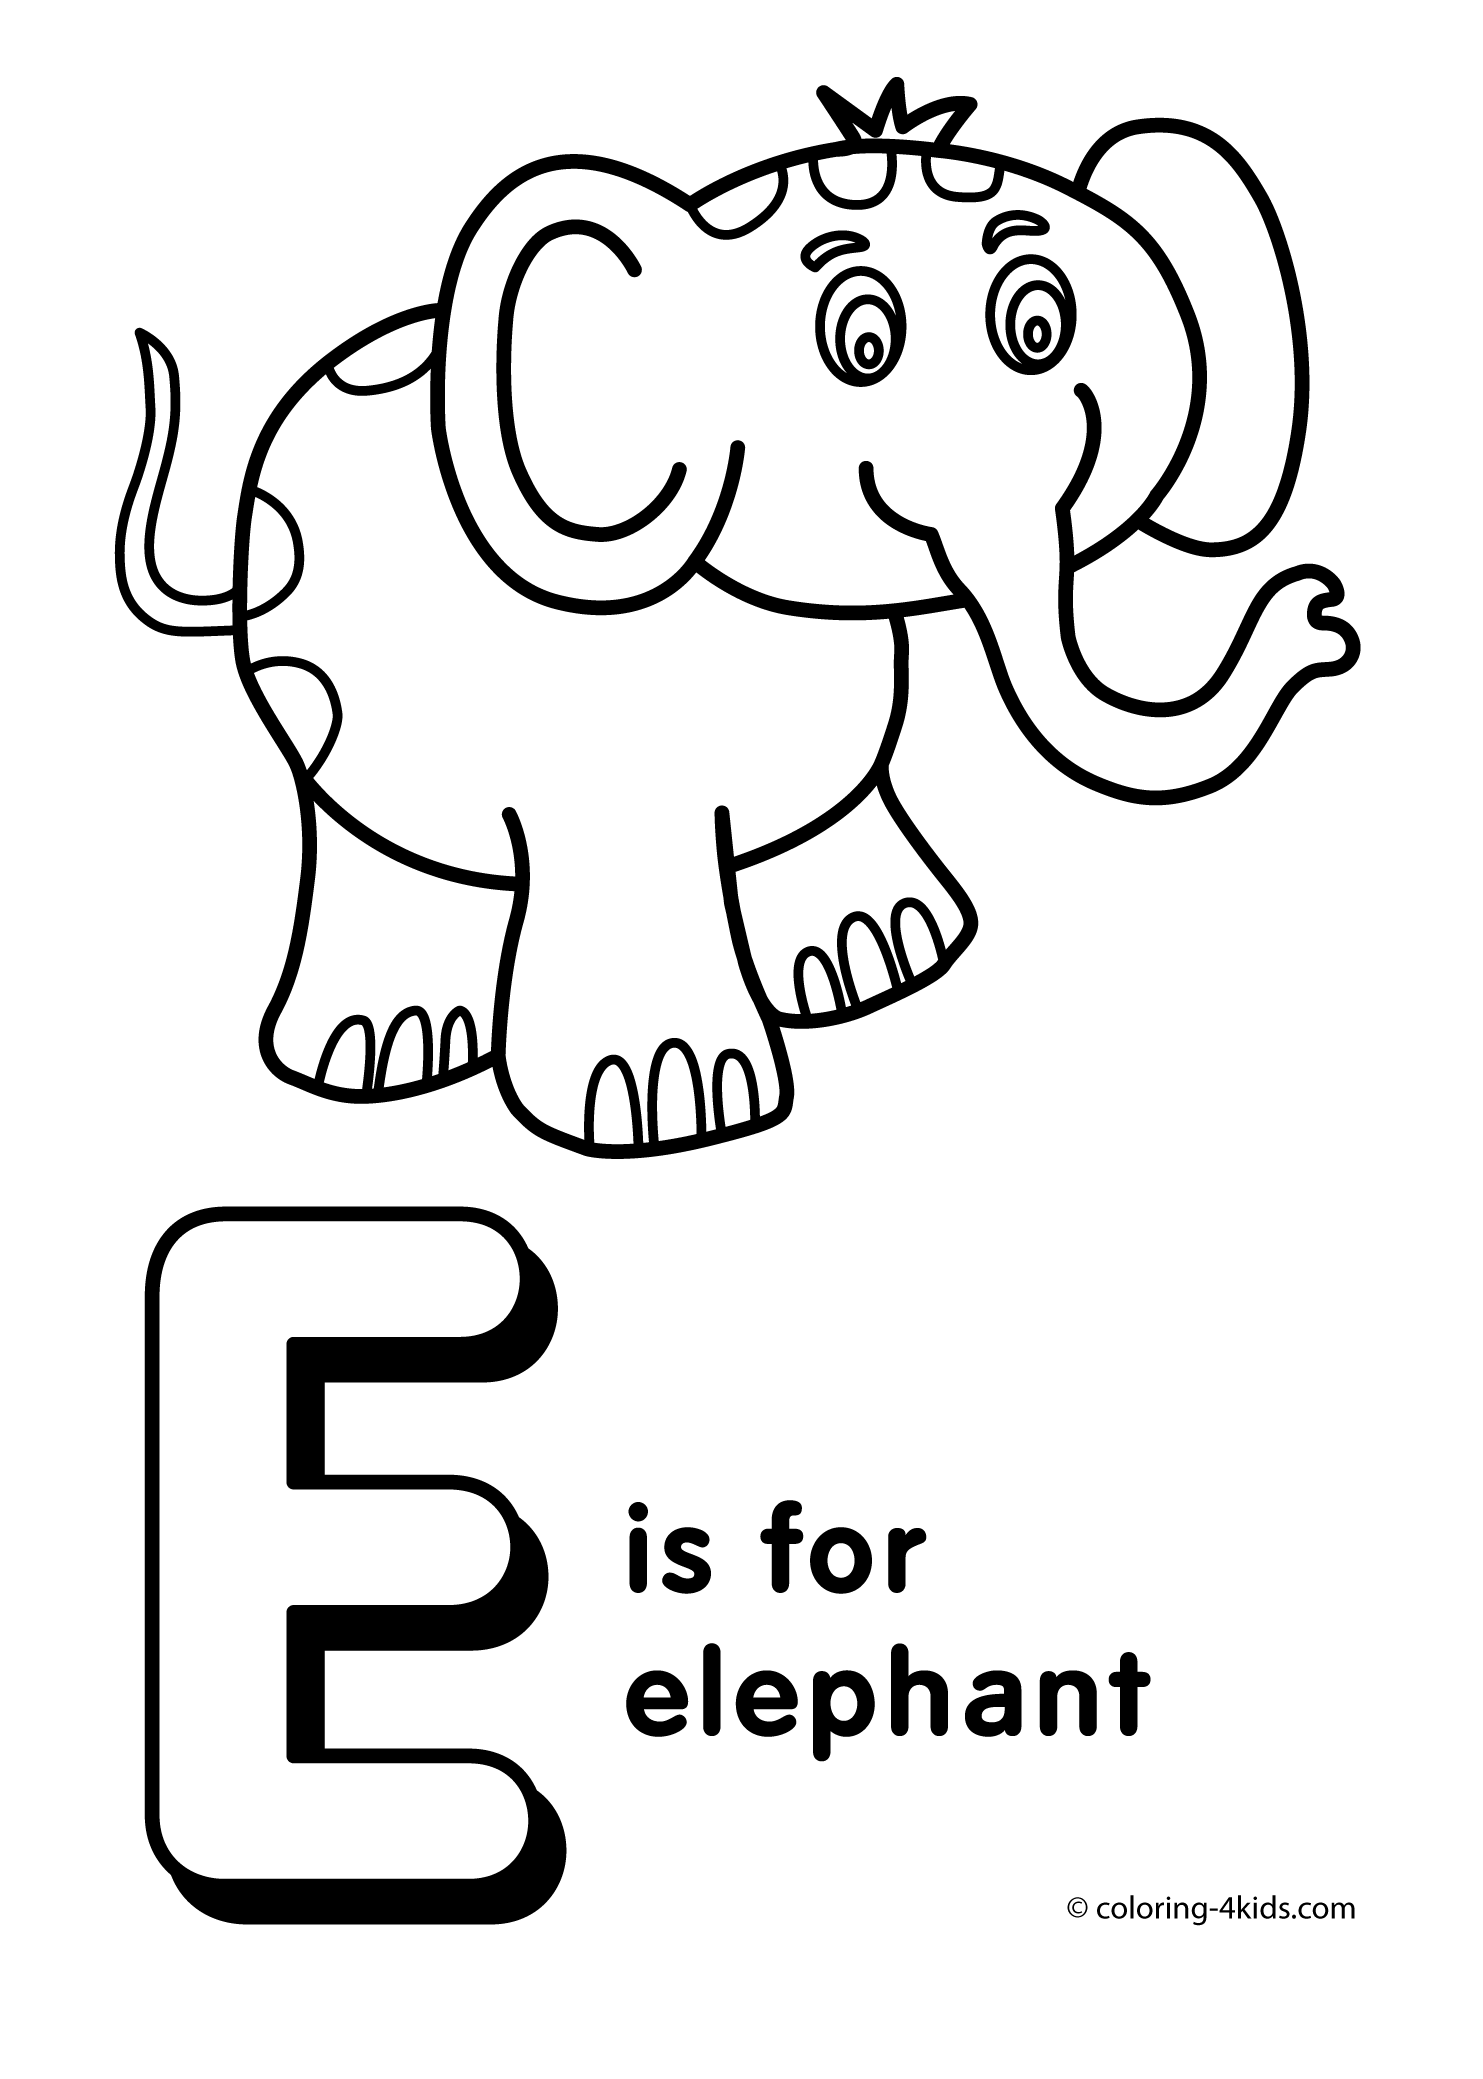 slashcasual-letter-e-coloring-pages